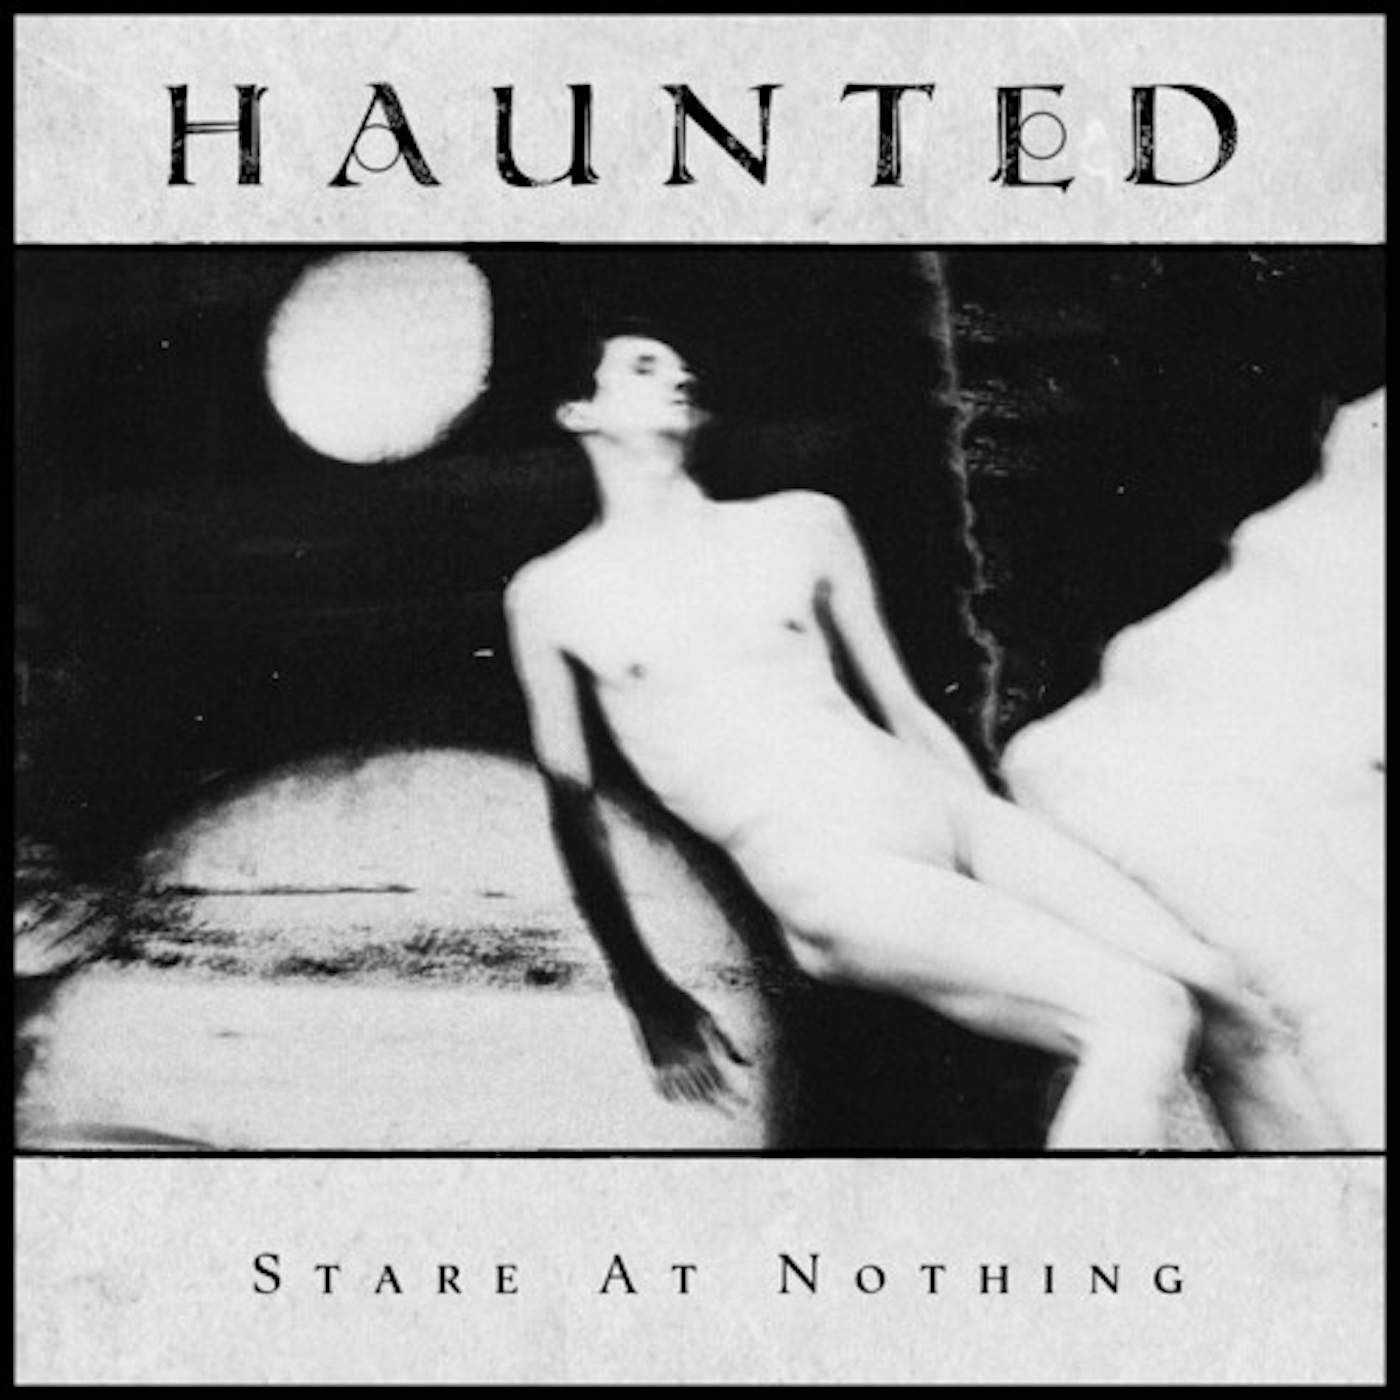 Haunted STARE AT NOTHING CD